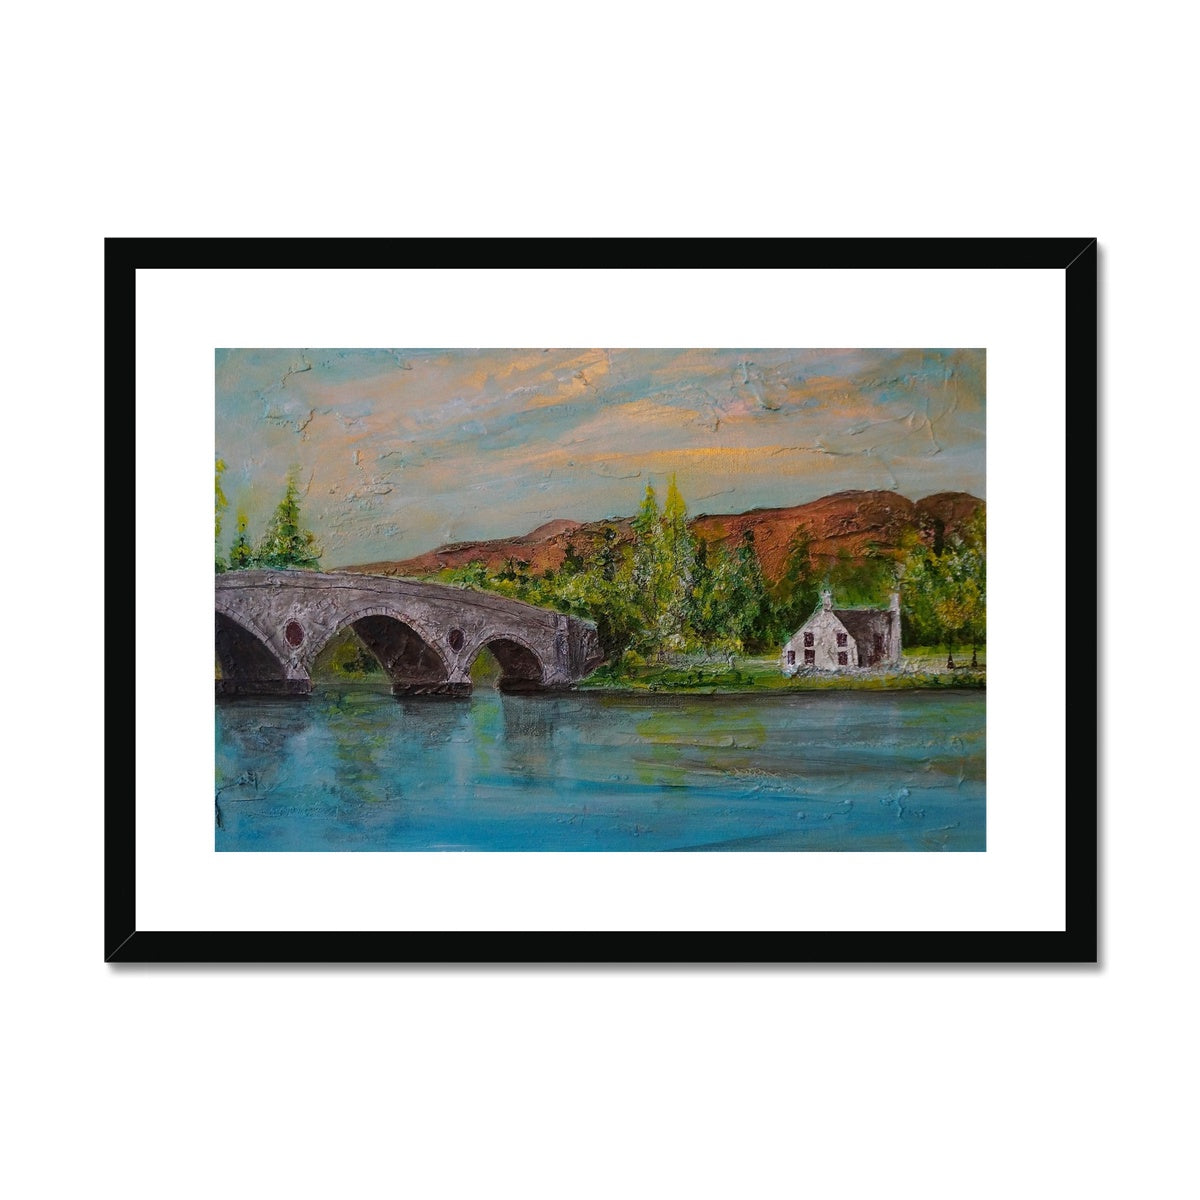 Kenmore Bridge ii Painting | Framed & Mounted Prints From Scotland-Framed & Mounted Prints-Scottish Highlands & Lowlands Art Gallery-A2 Landscape-Black Frame-Paintings, Prints, Homeware, Art Gifts From Scotland By Scottish Artist Kevin Hunter